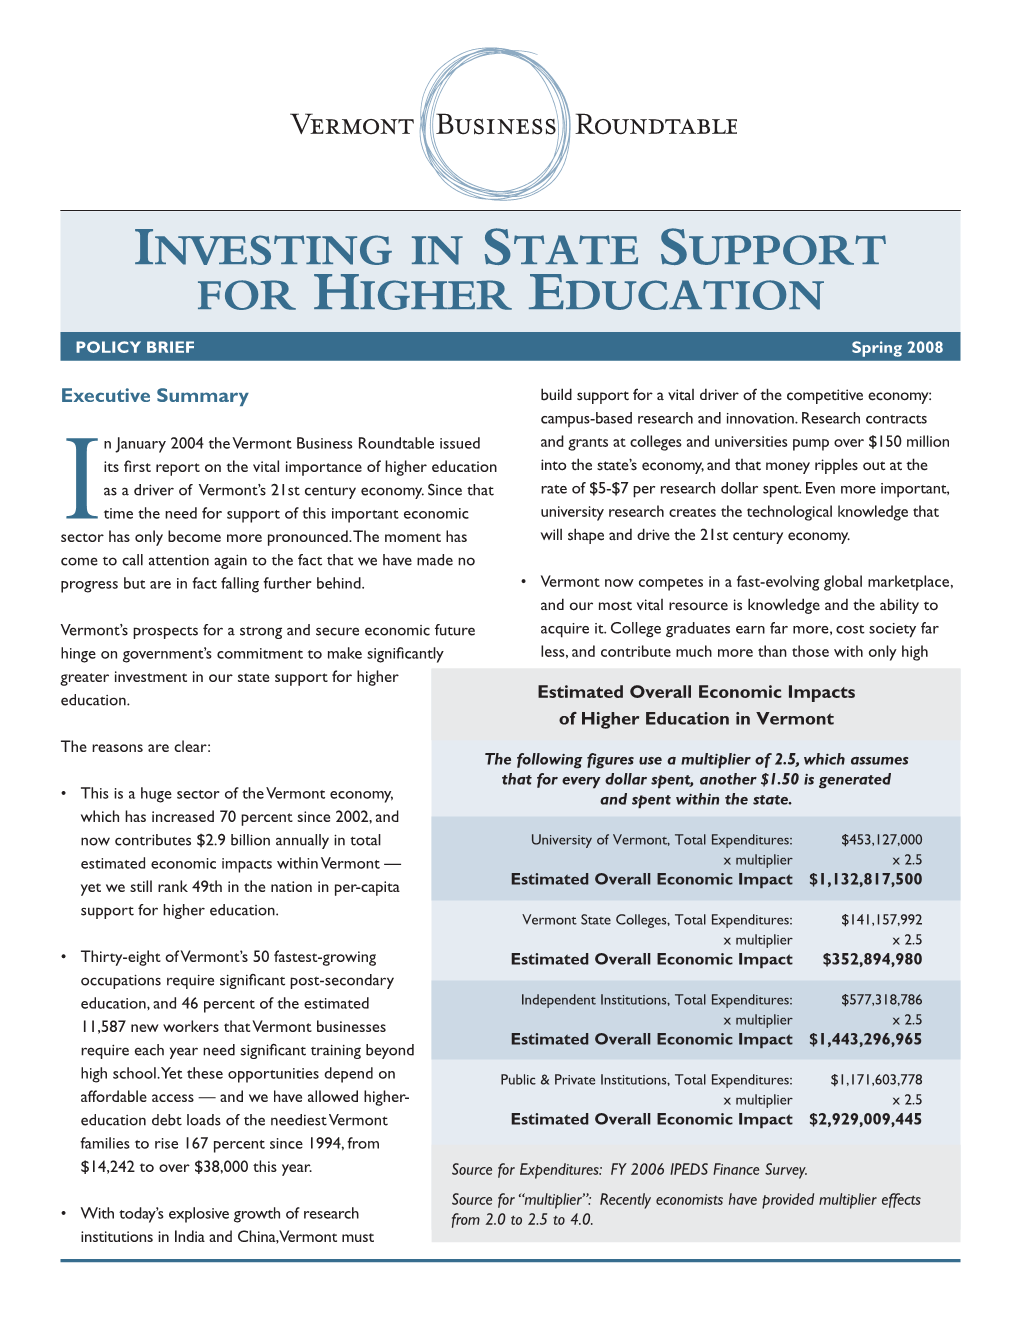 Higher Education Policy Brief